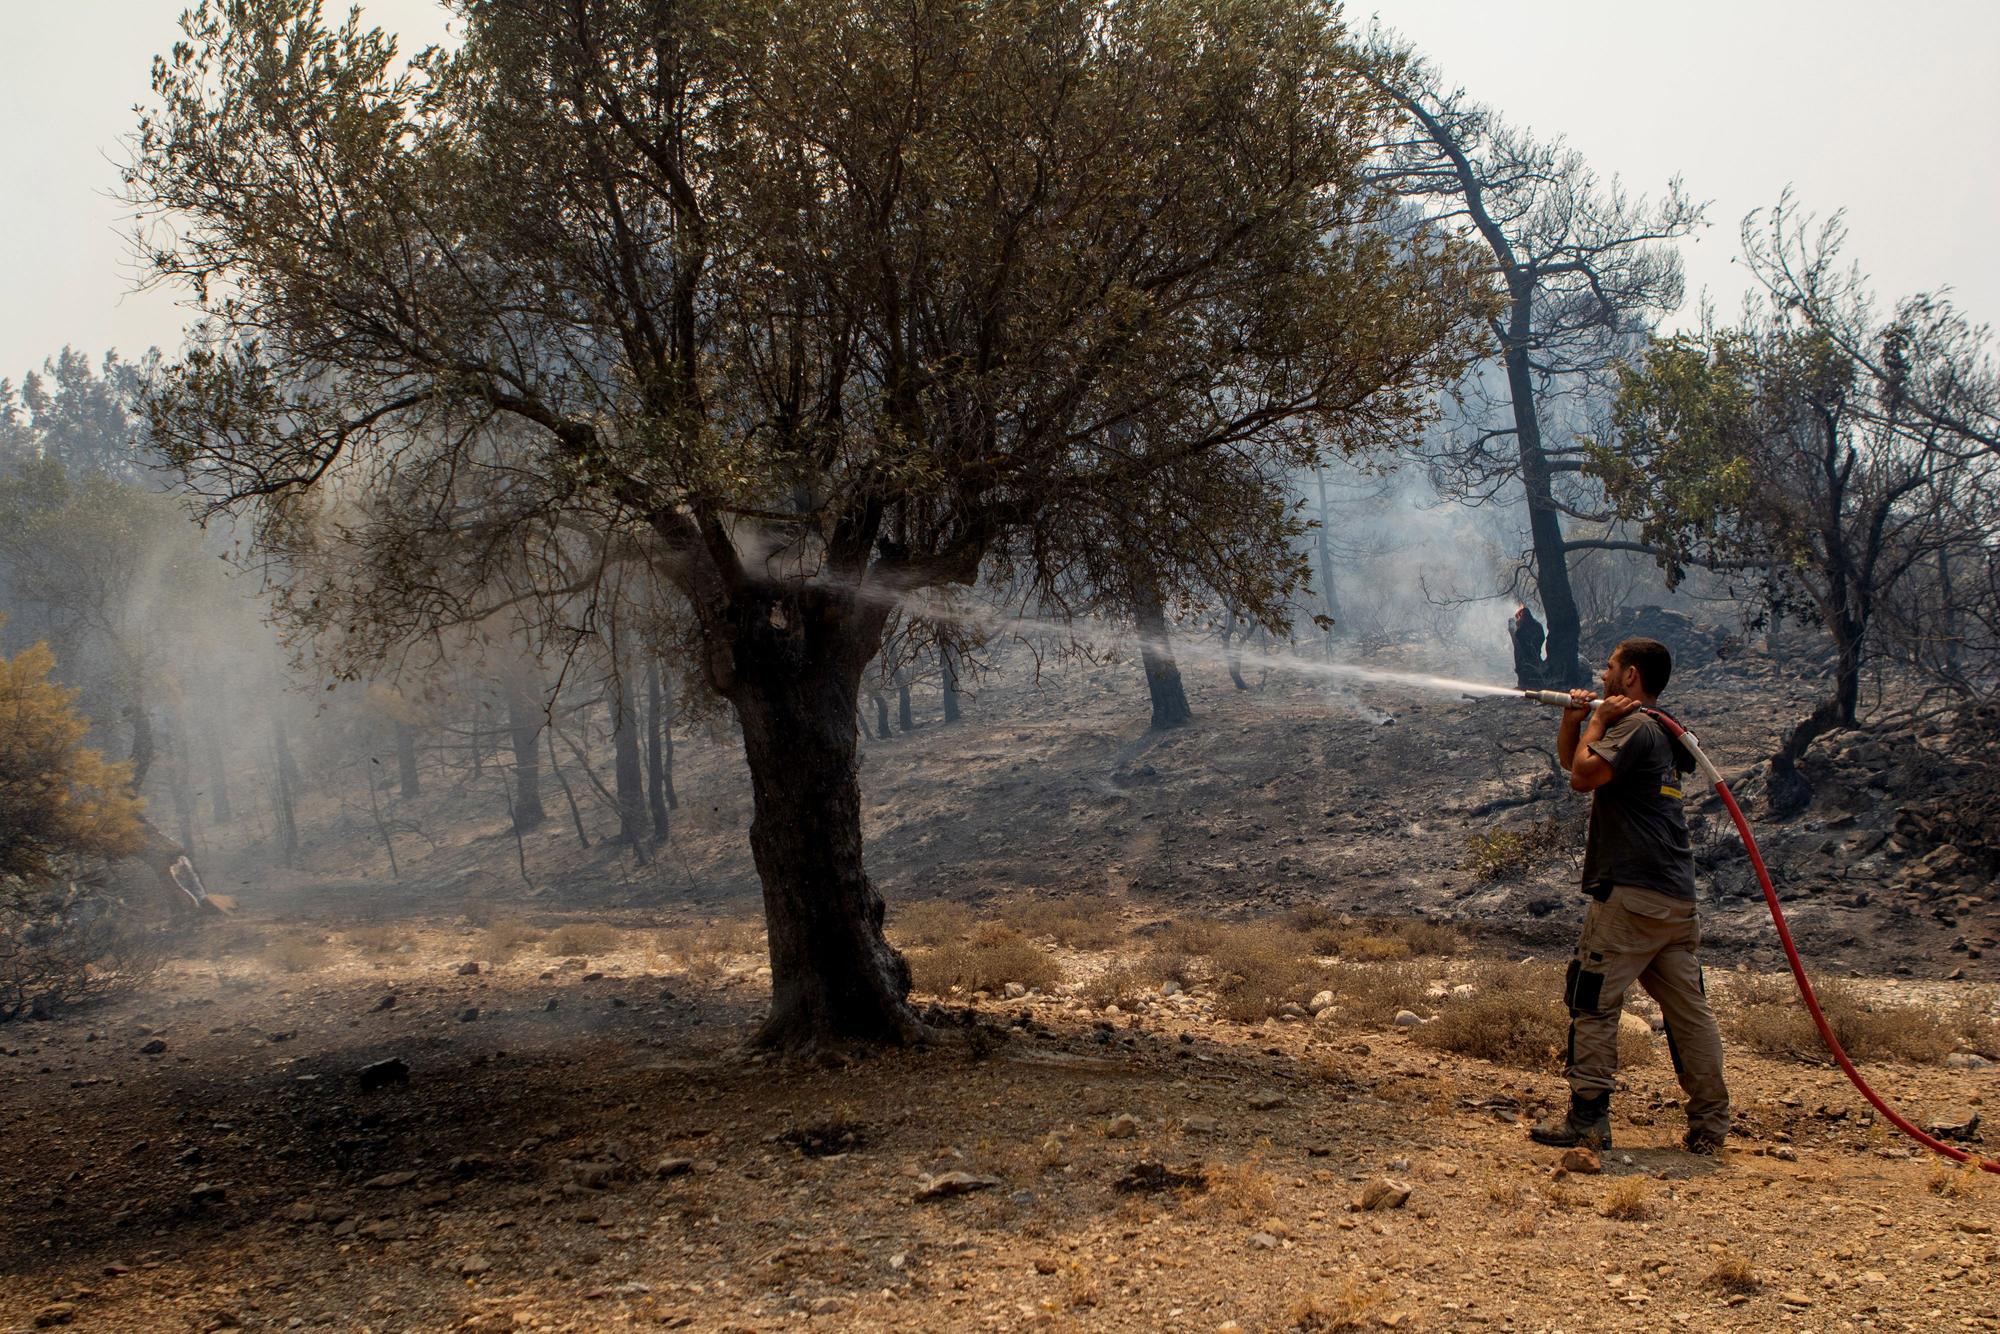 Rhodes raging fires forced largest evacuation operation ever in Greece